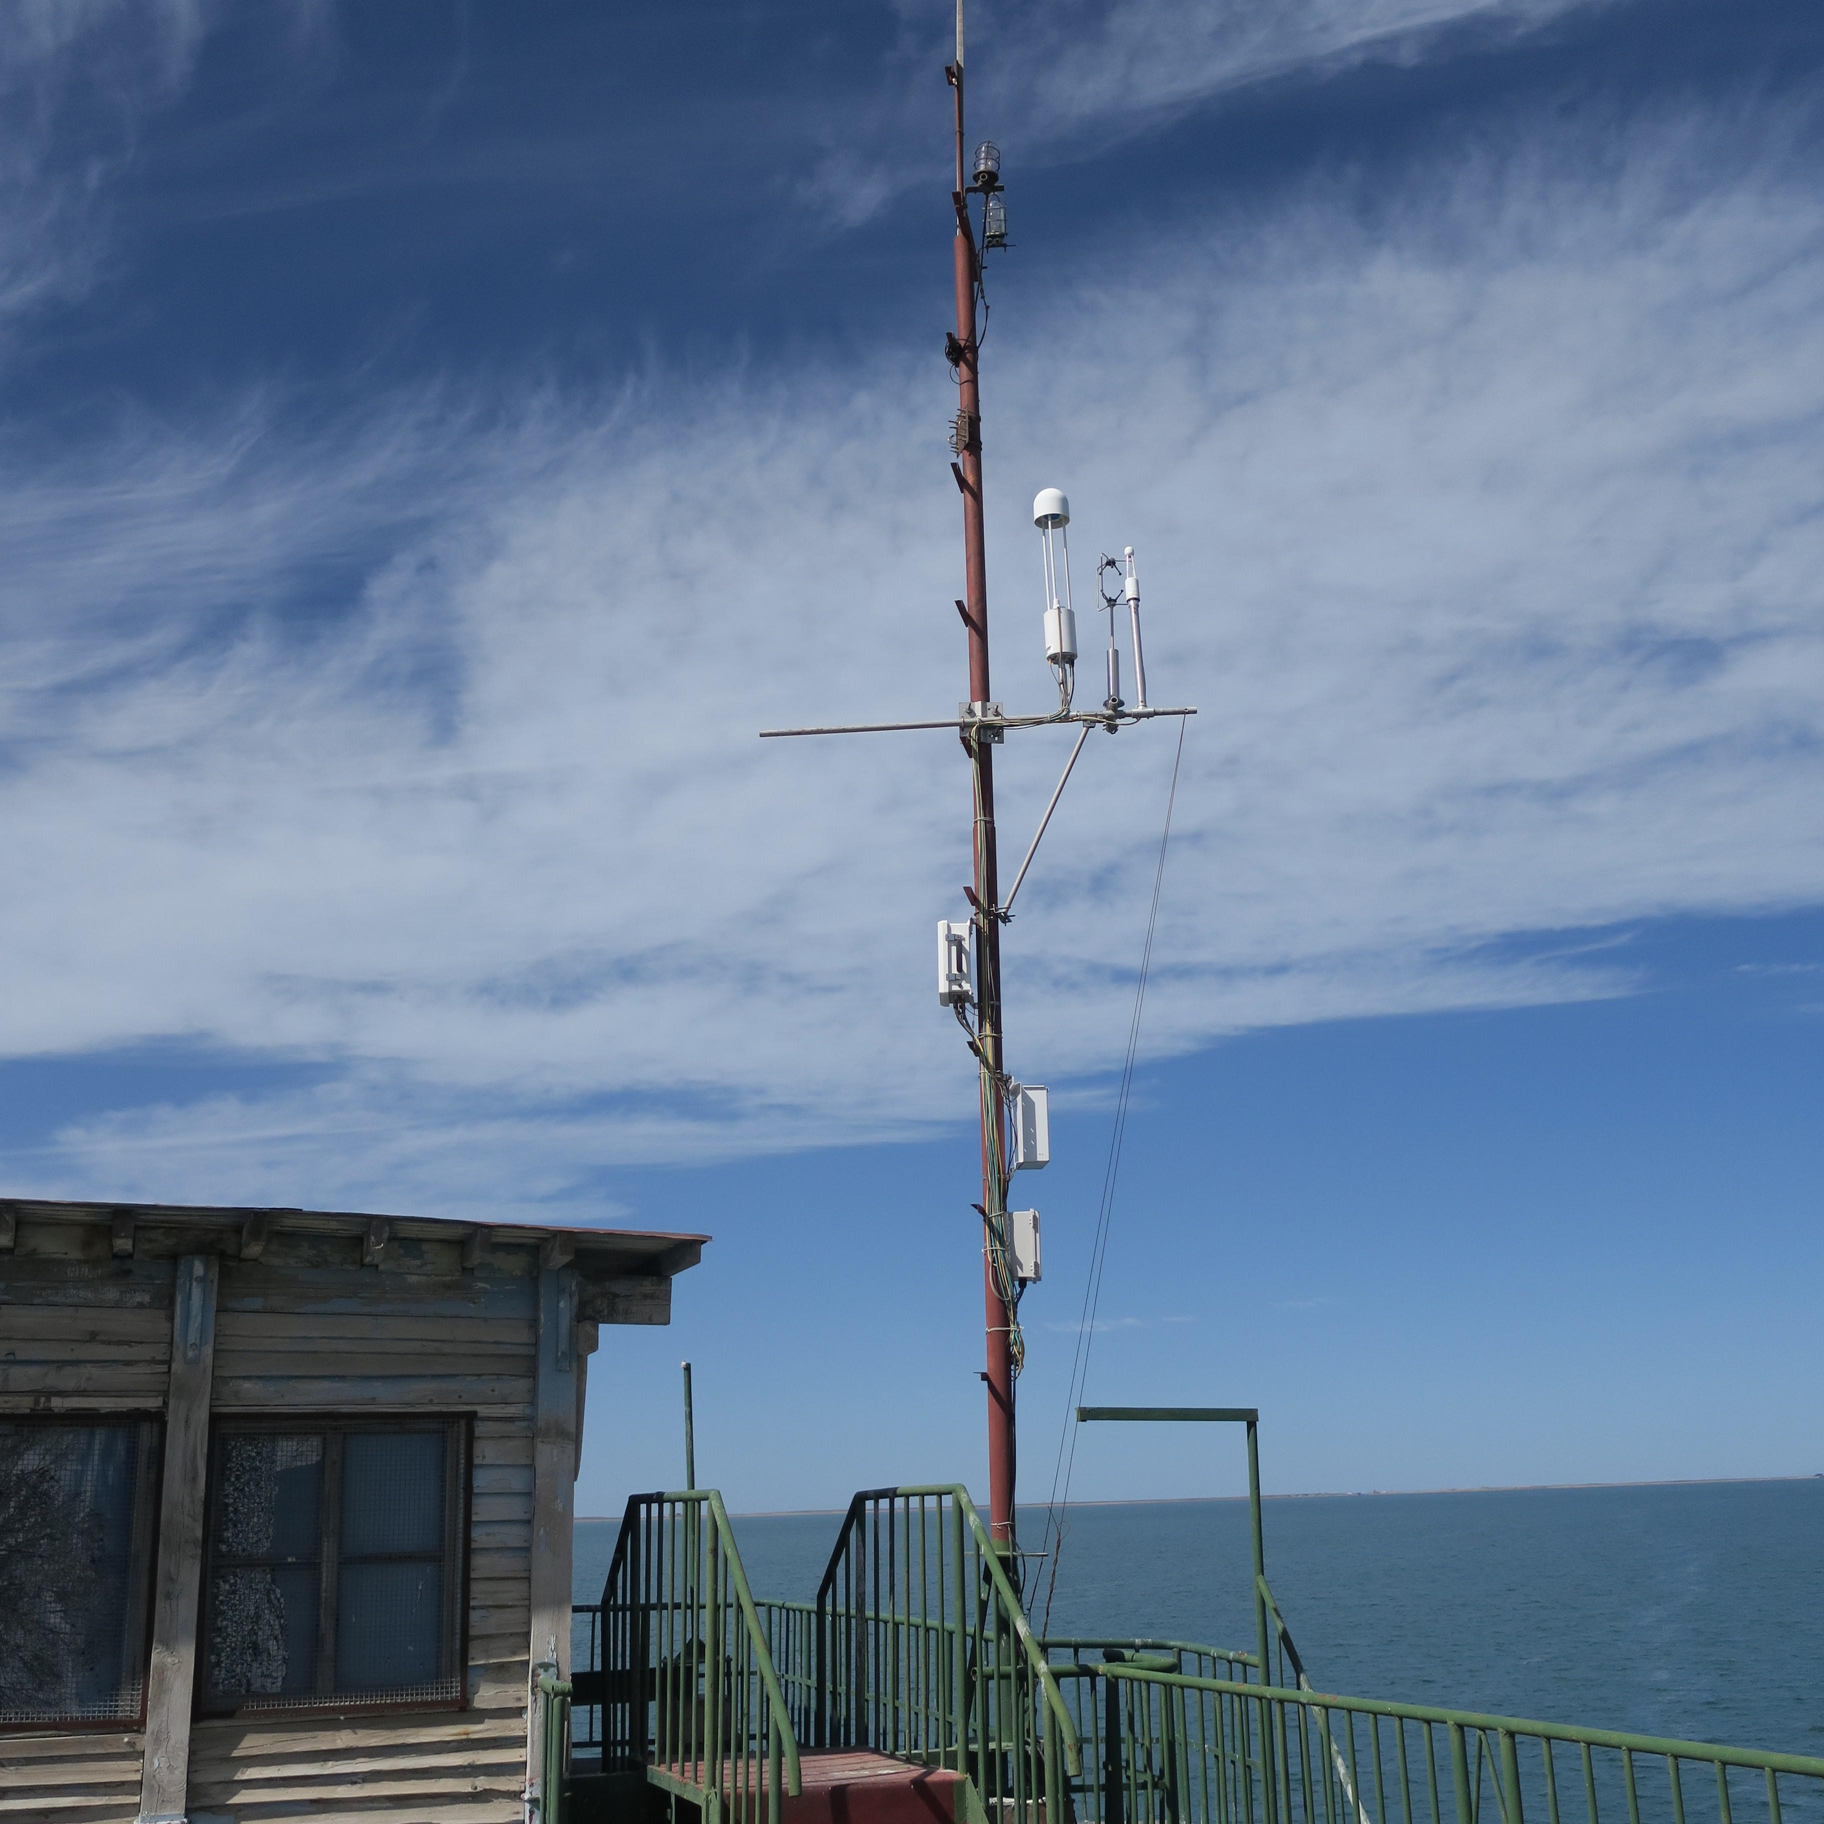 Qilian Mountains integrated observatory network: Dataset of Qinghai Lake integrated observatory network (eddy covariance system of Yulei station on Qinghai lake, 2018)